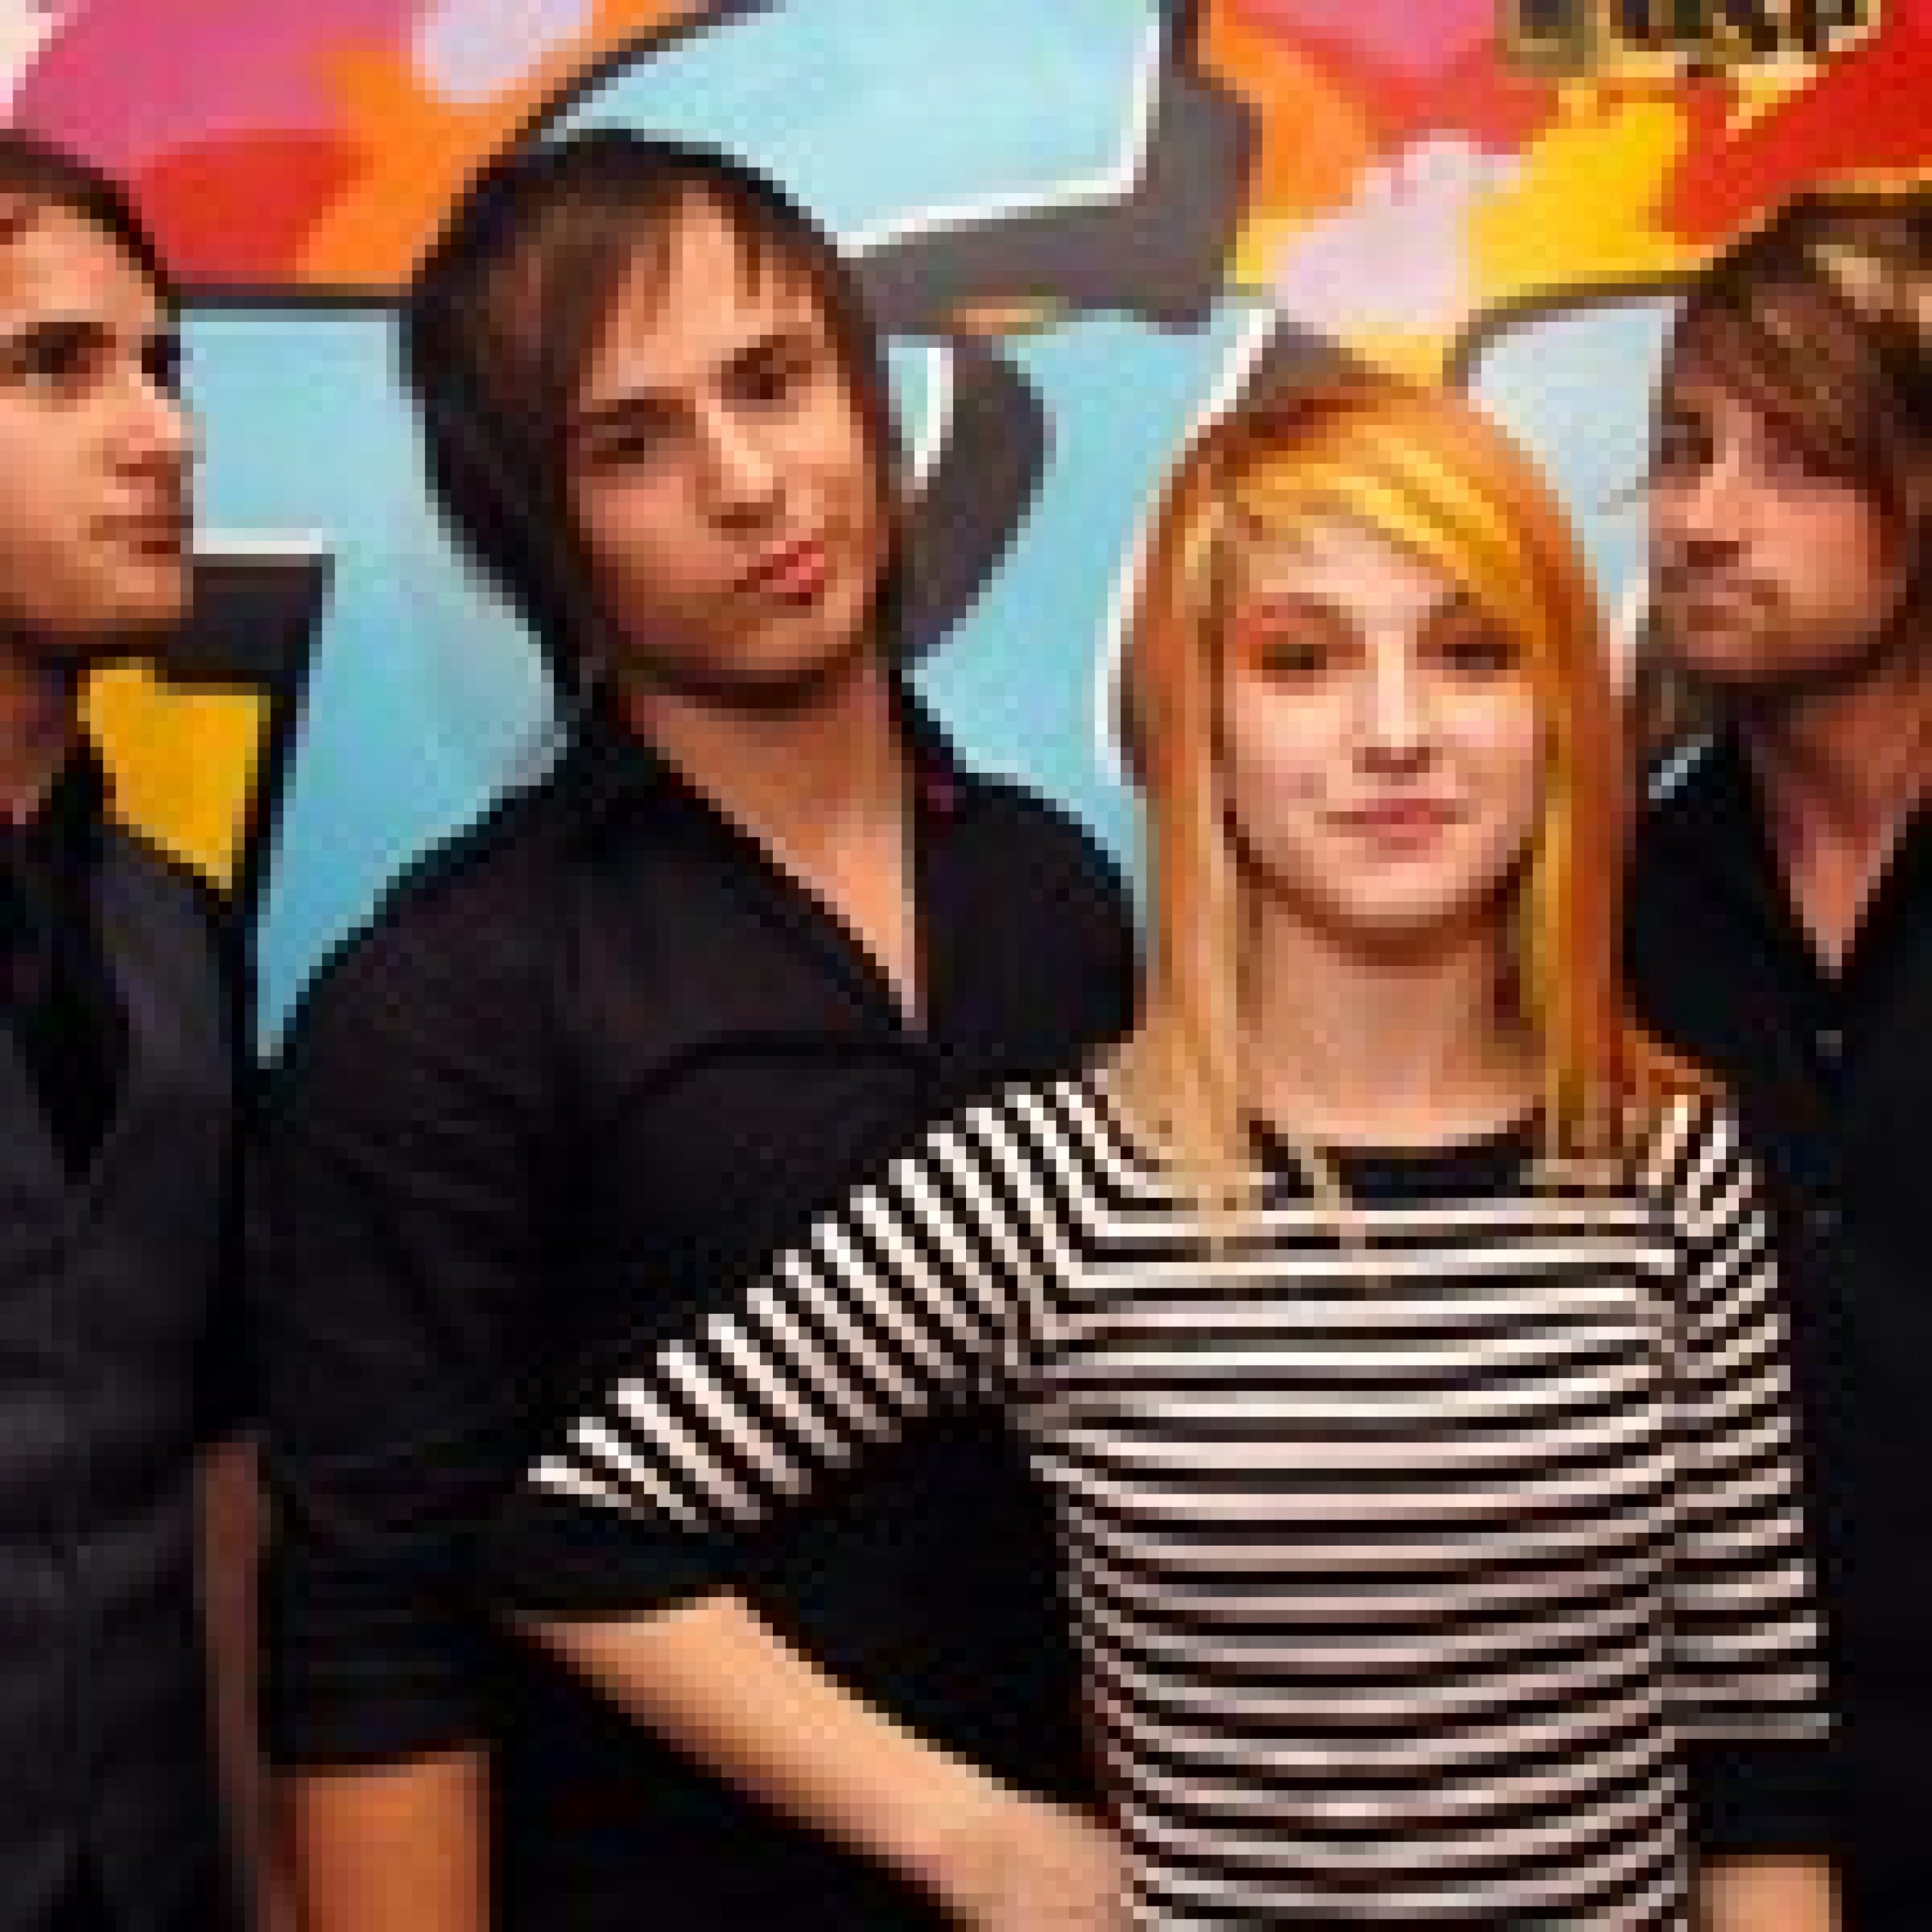 Paramore’s ‘Riot!’ Hits Top 10 on Billboard’s Top Album Sales Chart After Vinyl Reissue